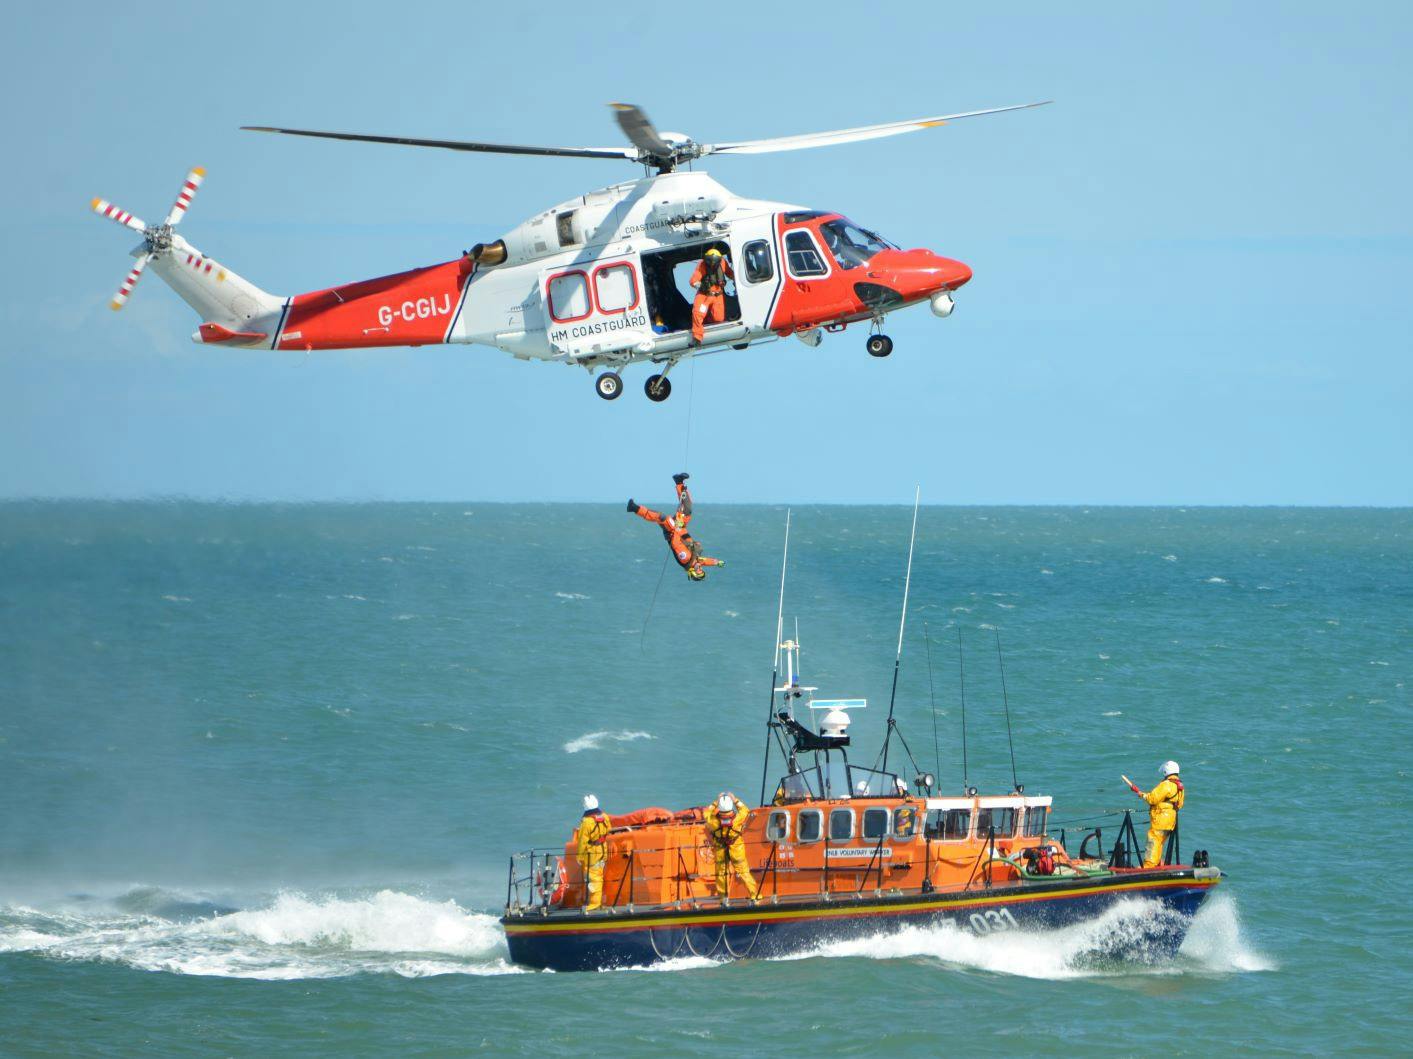 Photograph of a coastguard helicopter carrying out a rescue maneuver over a RNLI Lifeboat